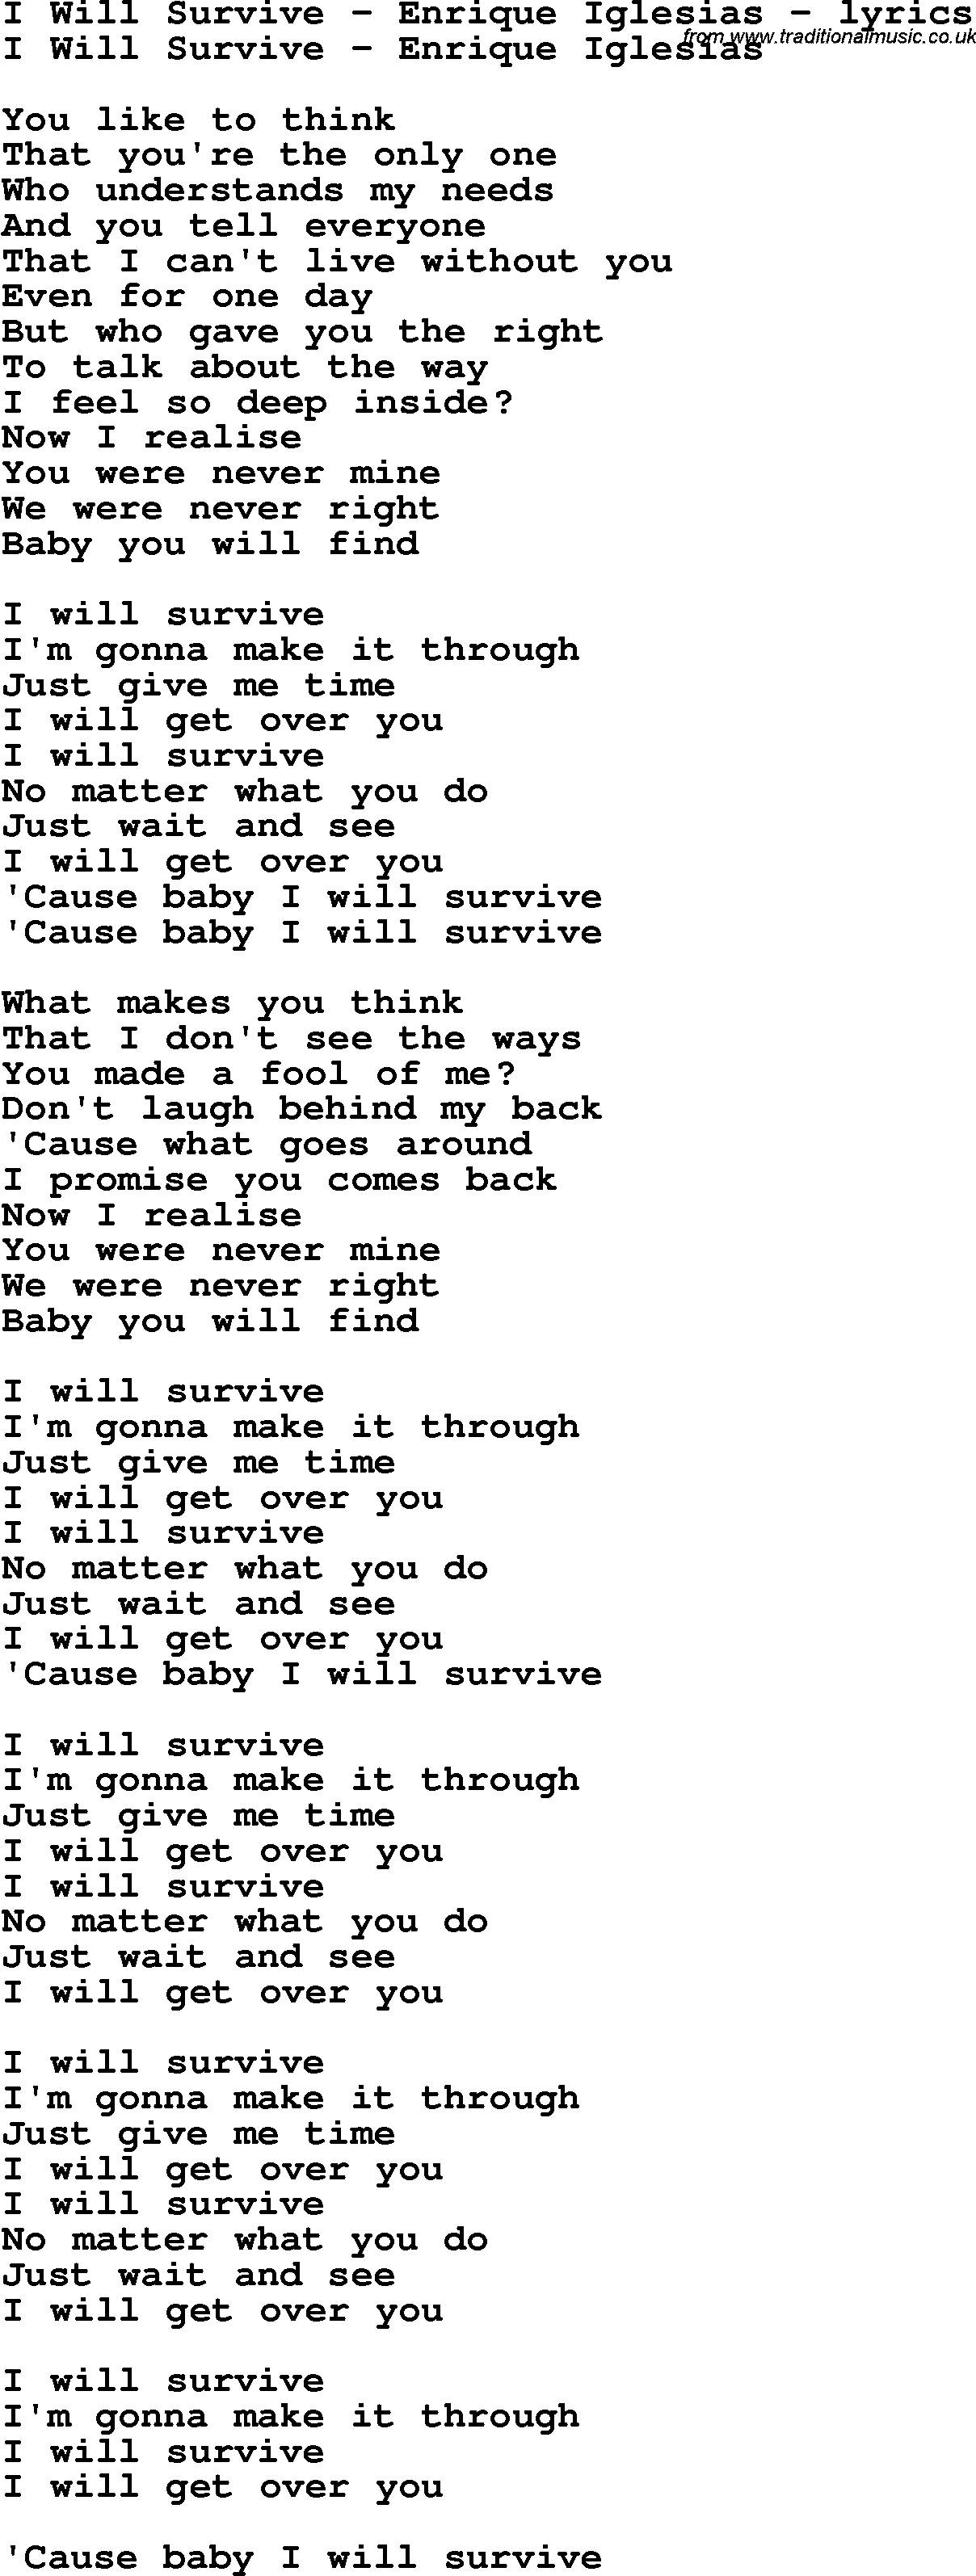 Love Song Lyrics for: I Will Survive - Enrique Iglesias